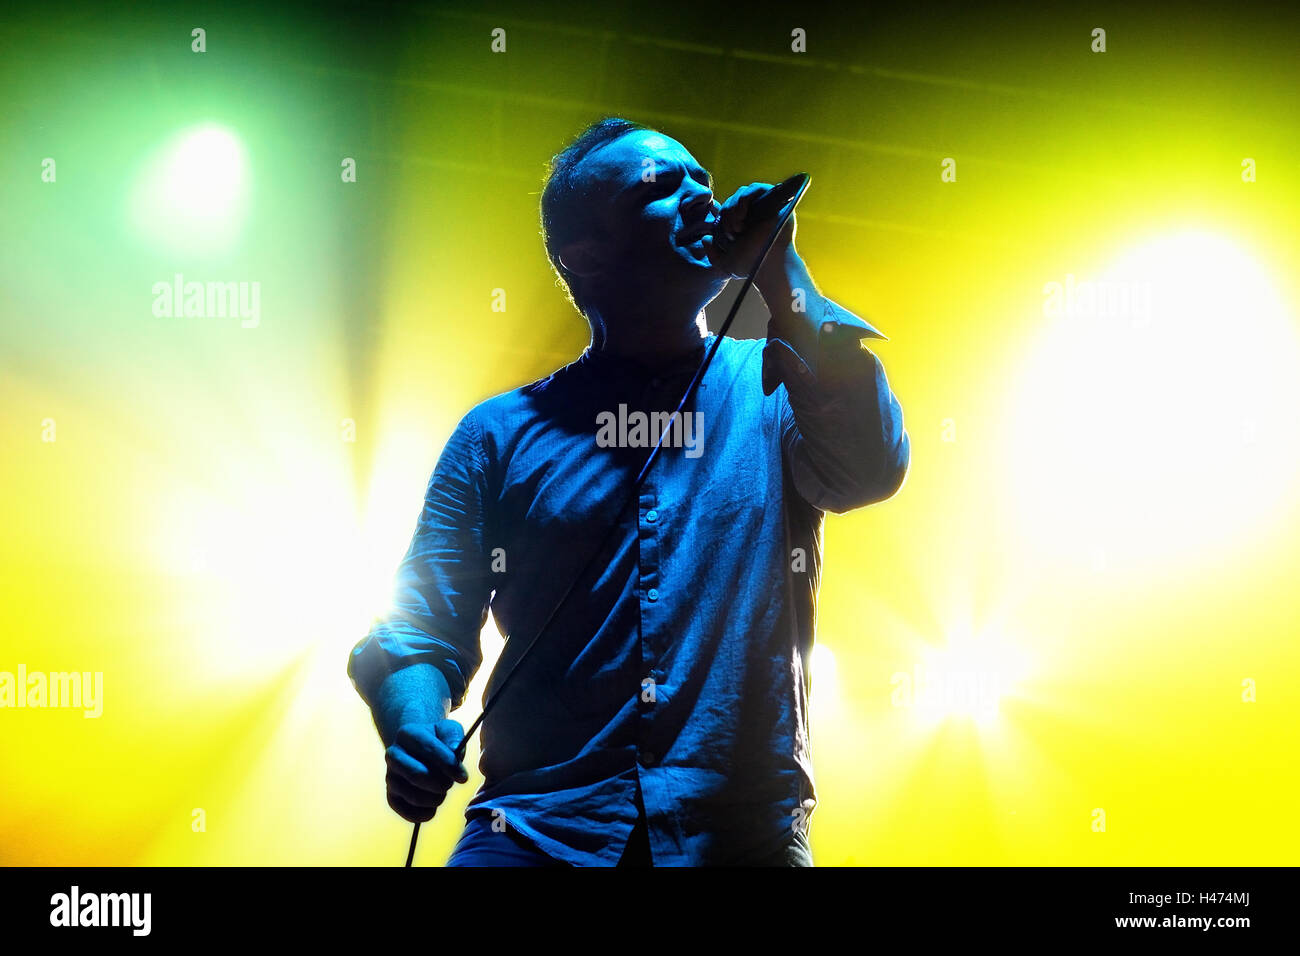 BARCELONA - OCT 20: Future Islands (synthpop electronic dance band) performs at Razzmatazz stage. Stock Photo